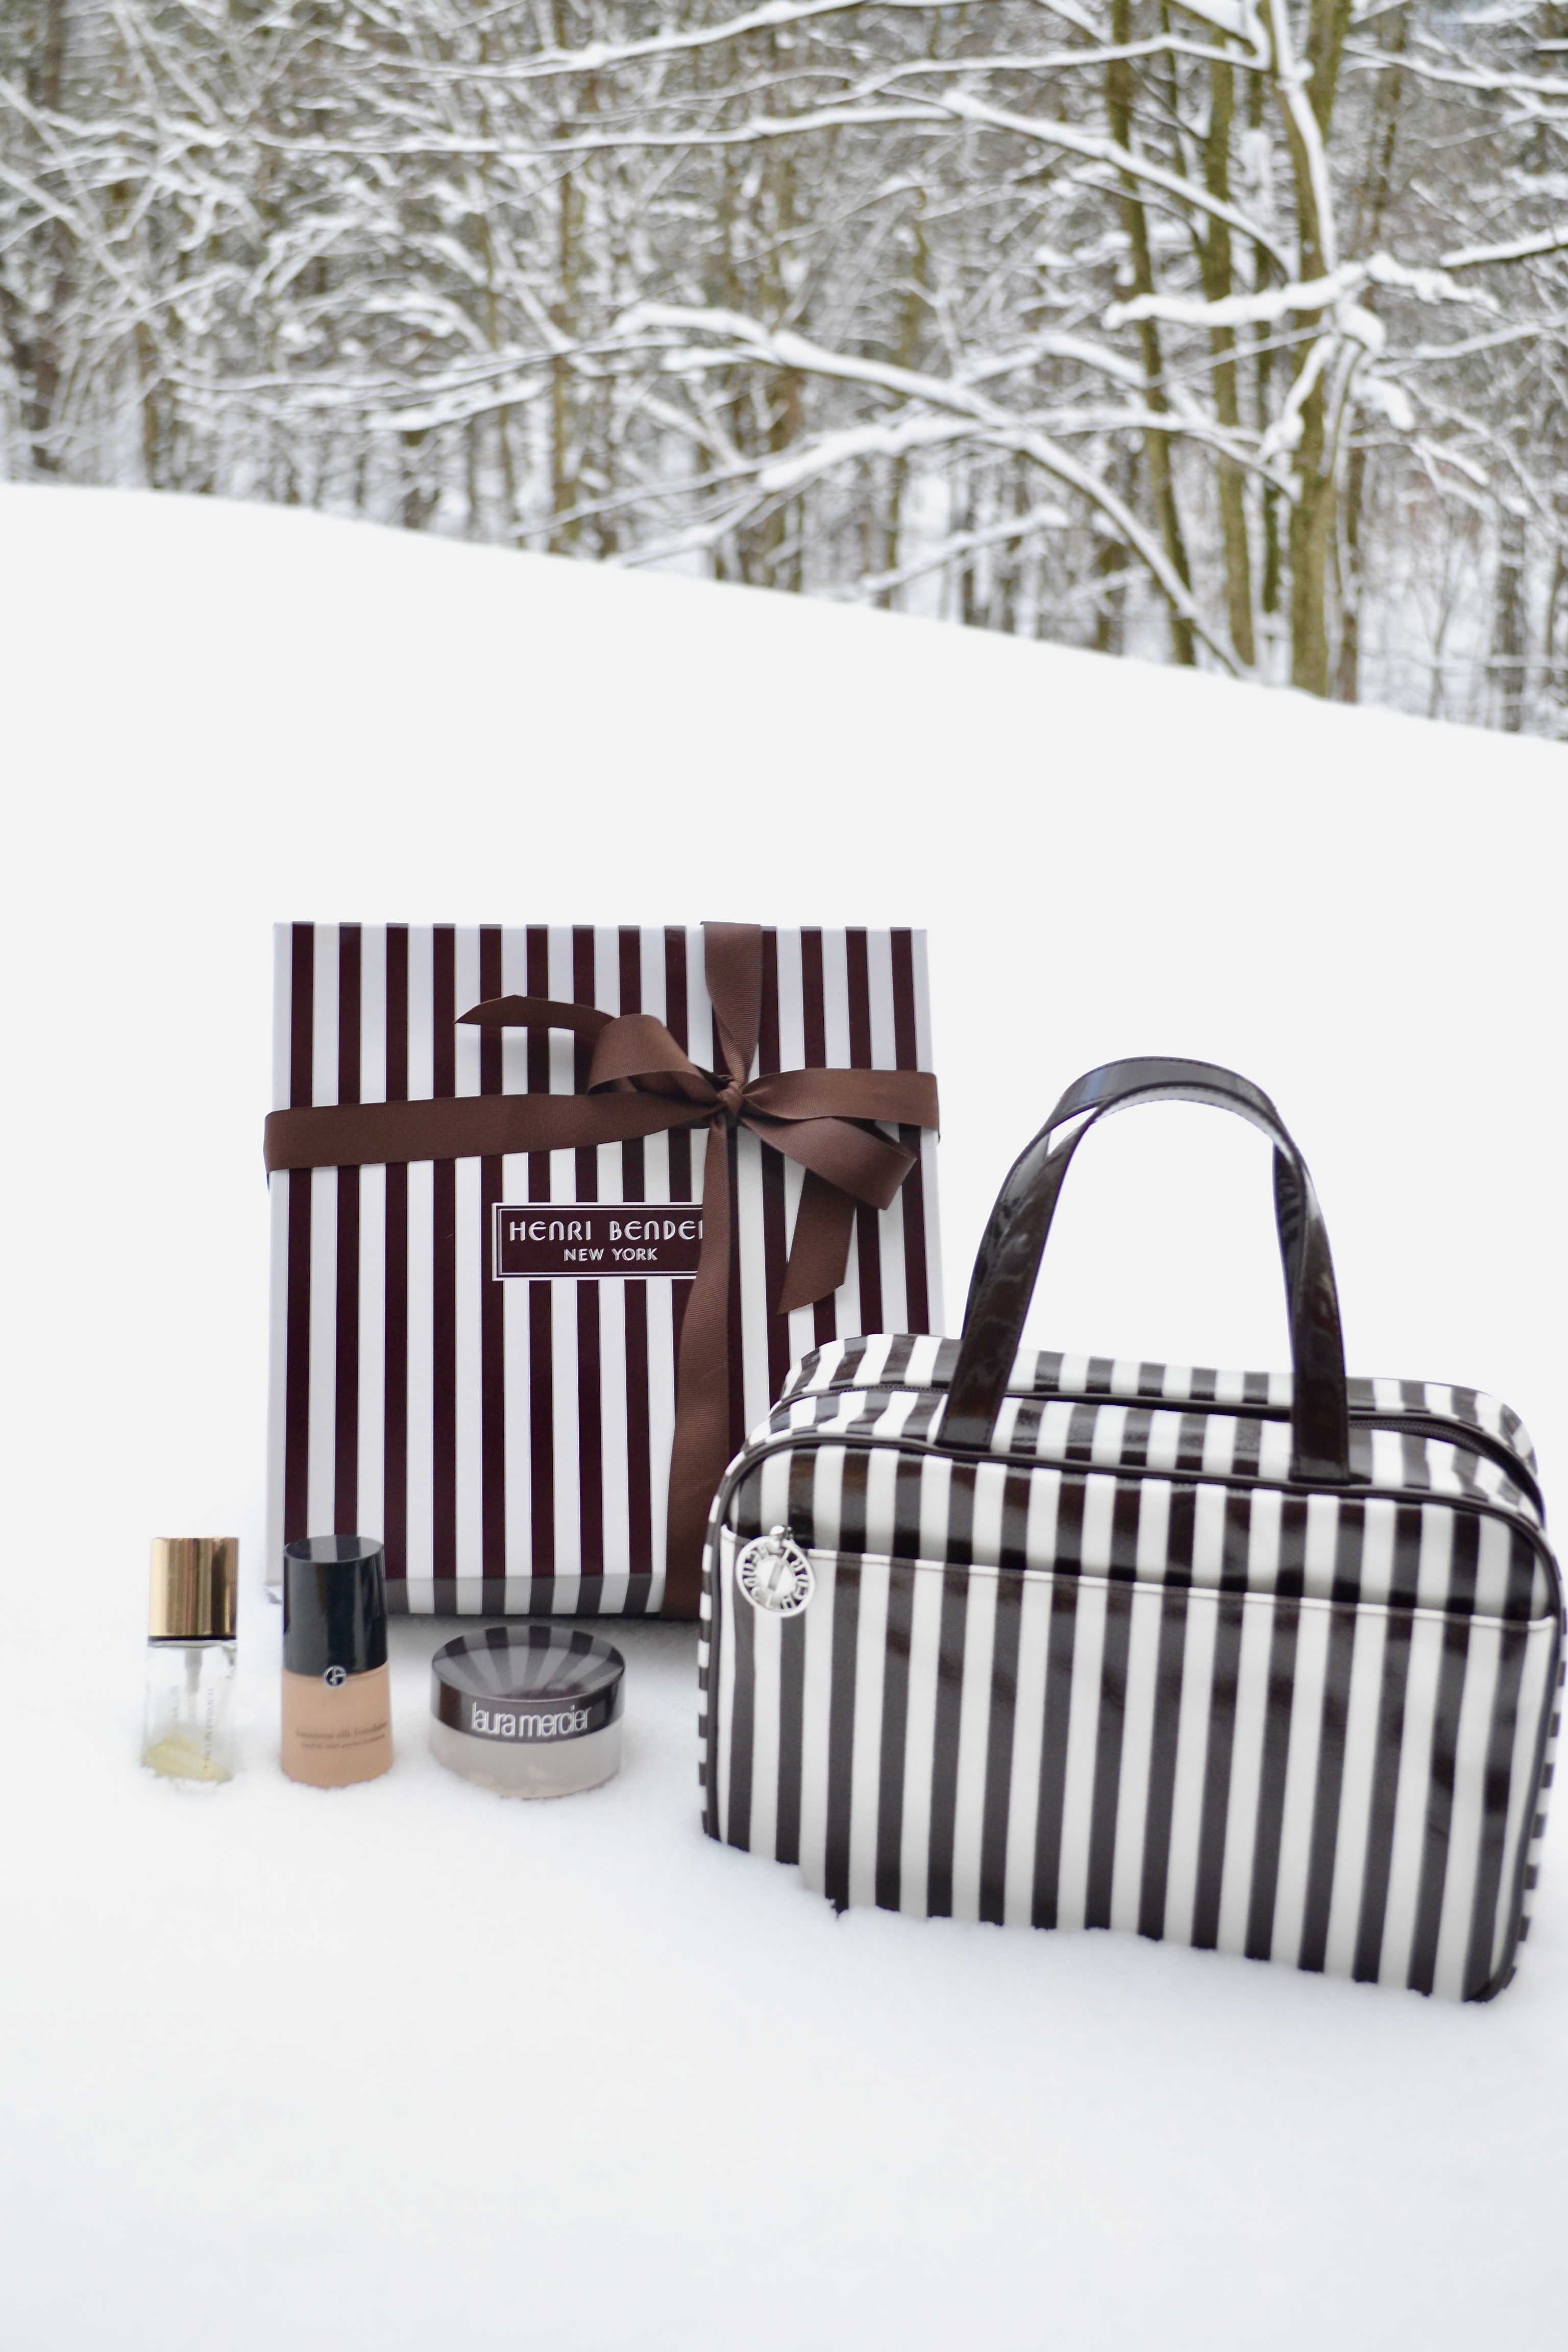 Henri Bendel Makeup Case |How to Travel with Your Makeup Products|